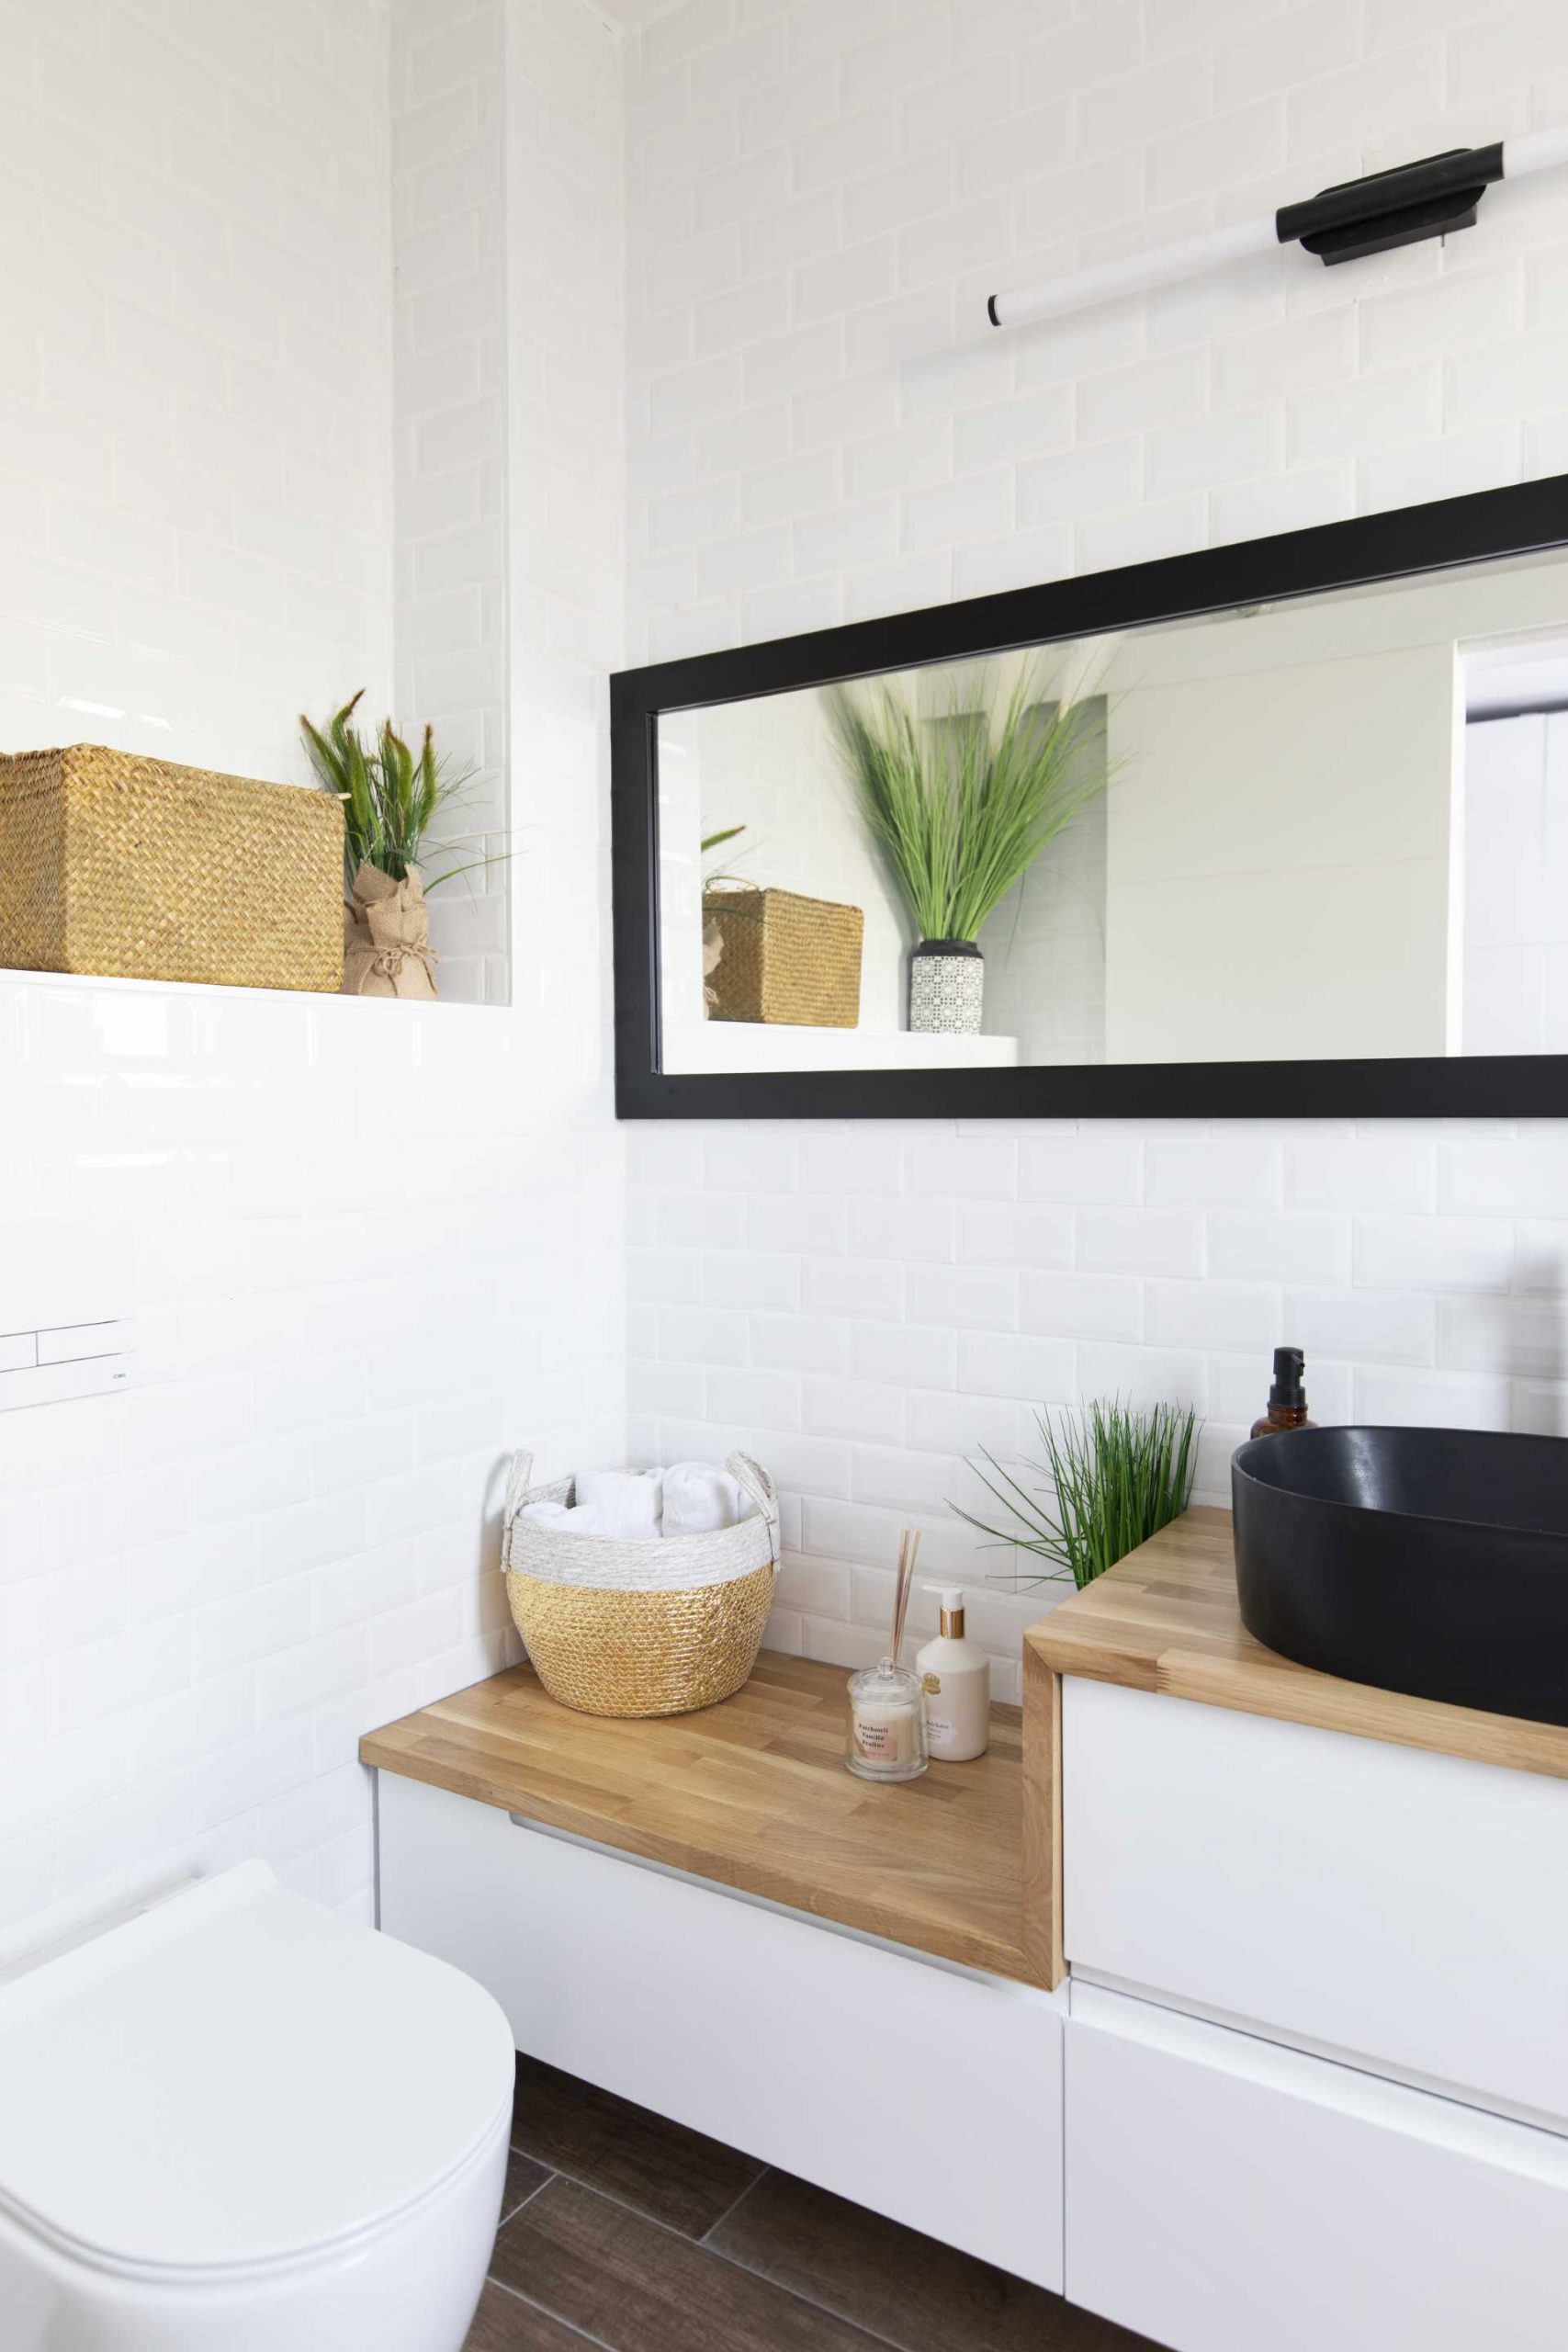 A modern bathroom with a white vanity, wood countertop, and black sink.